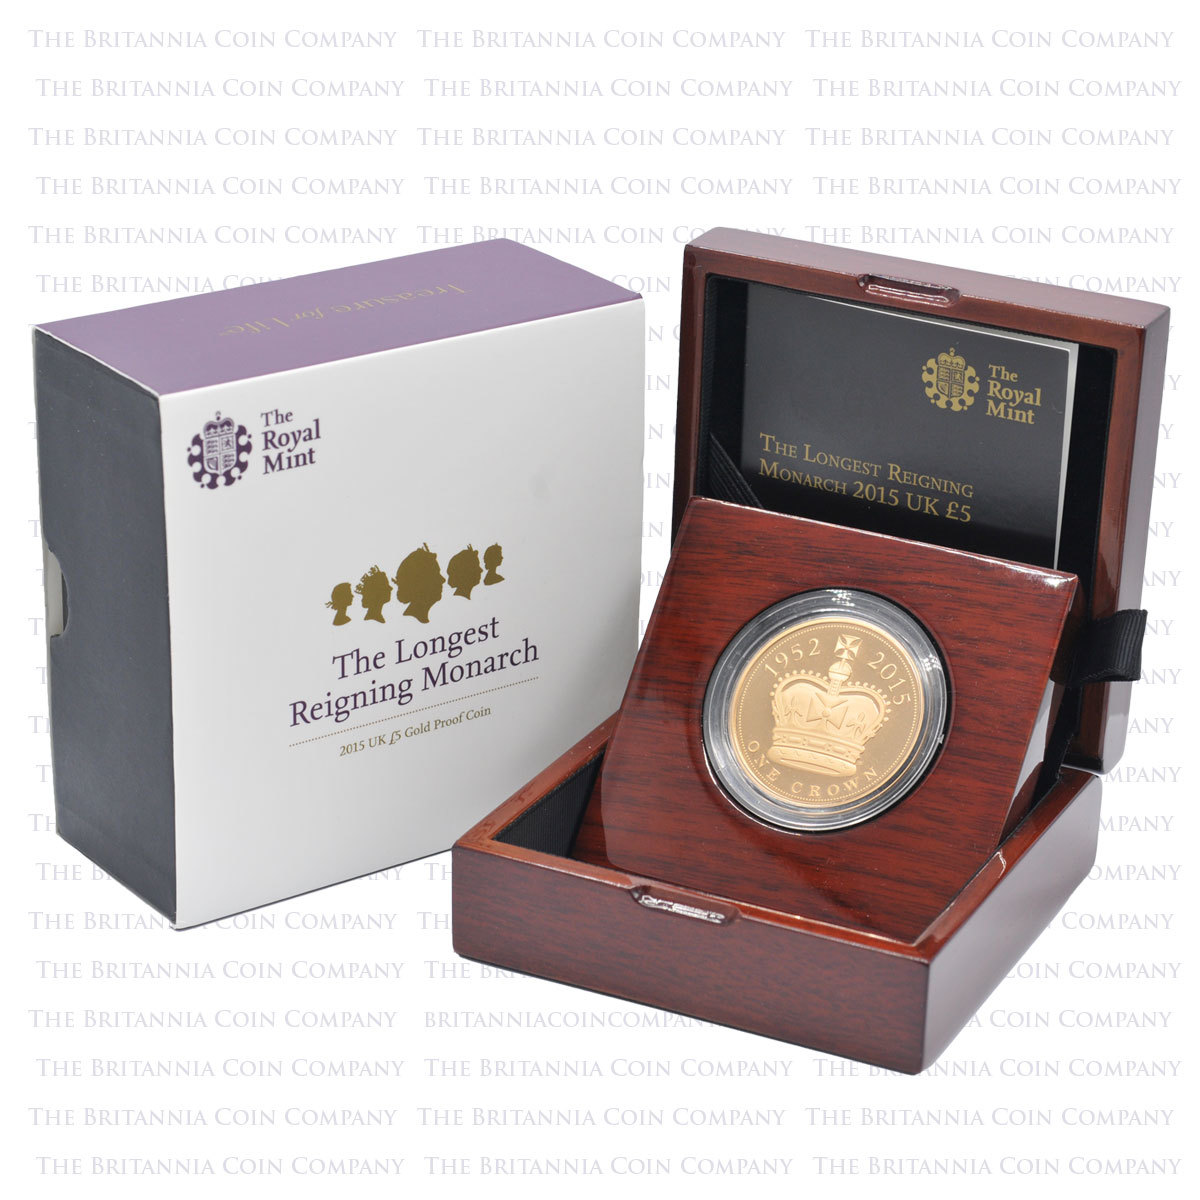 2015 UK £5 Gold Proof : The Longest Reigning Monarch